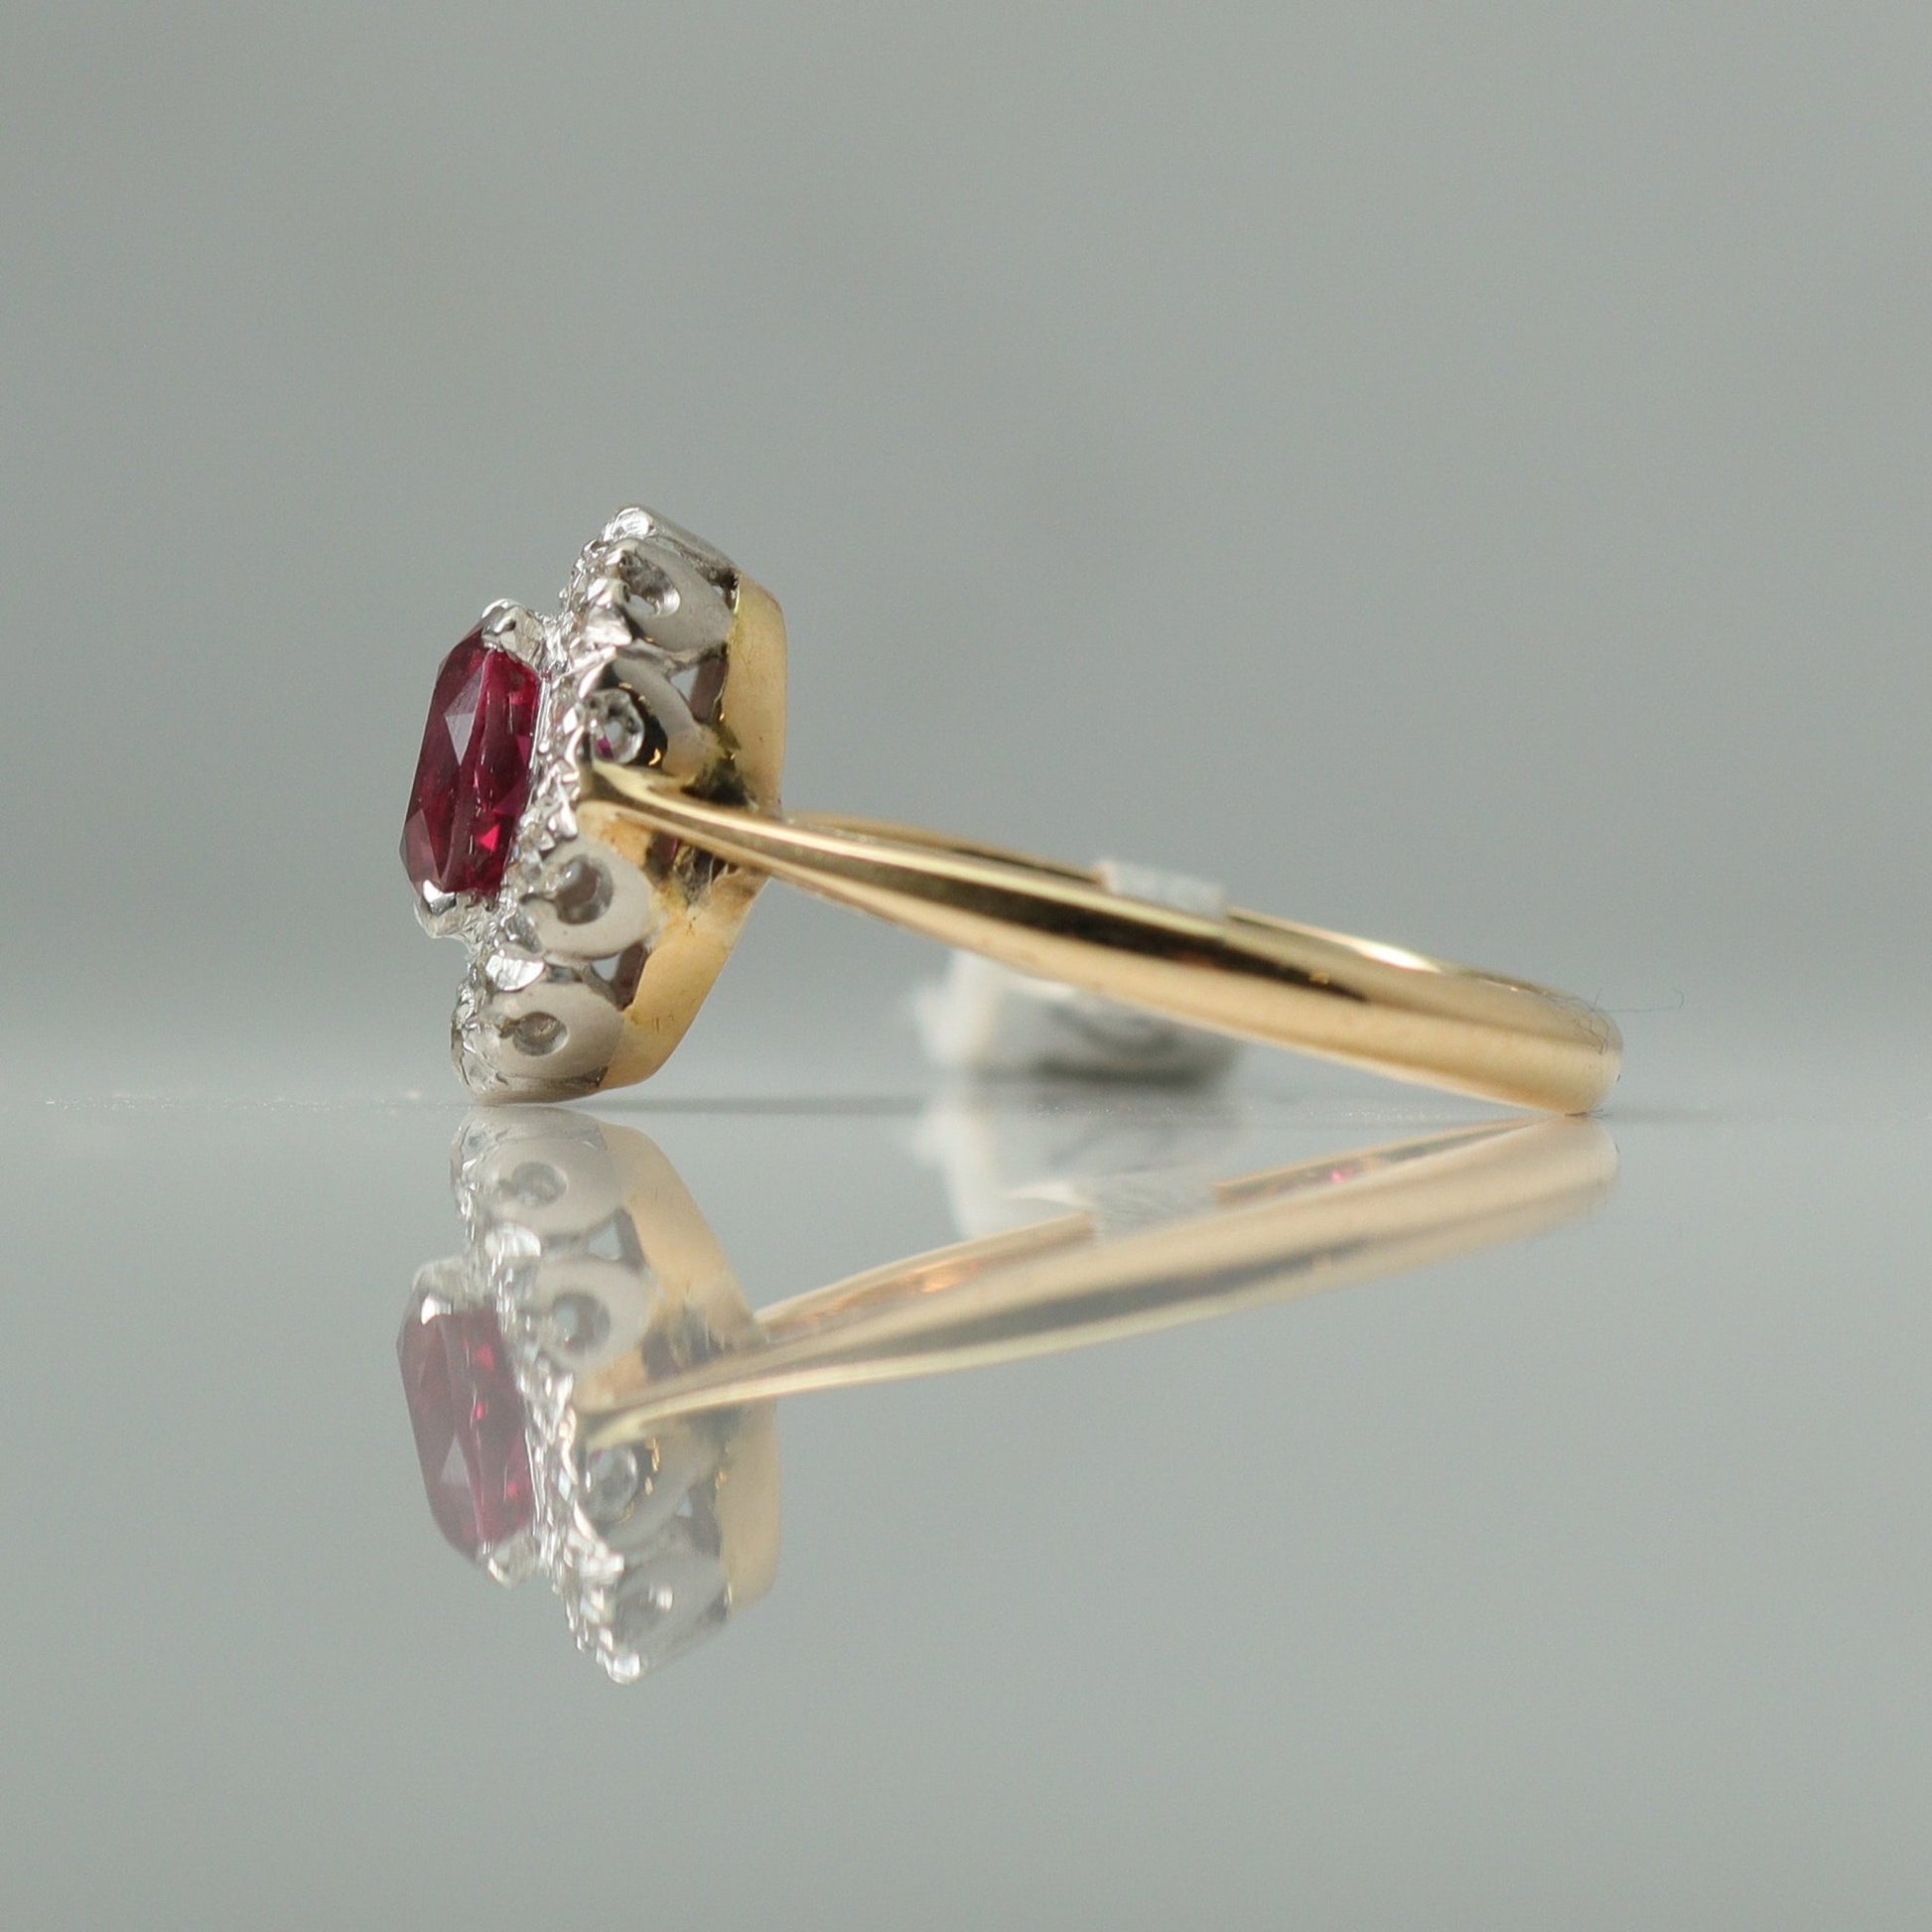 Vintage Ruby and Diamond Cluster Ring - Friar House